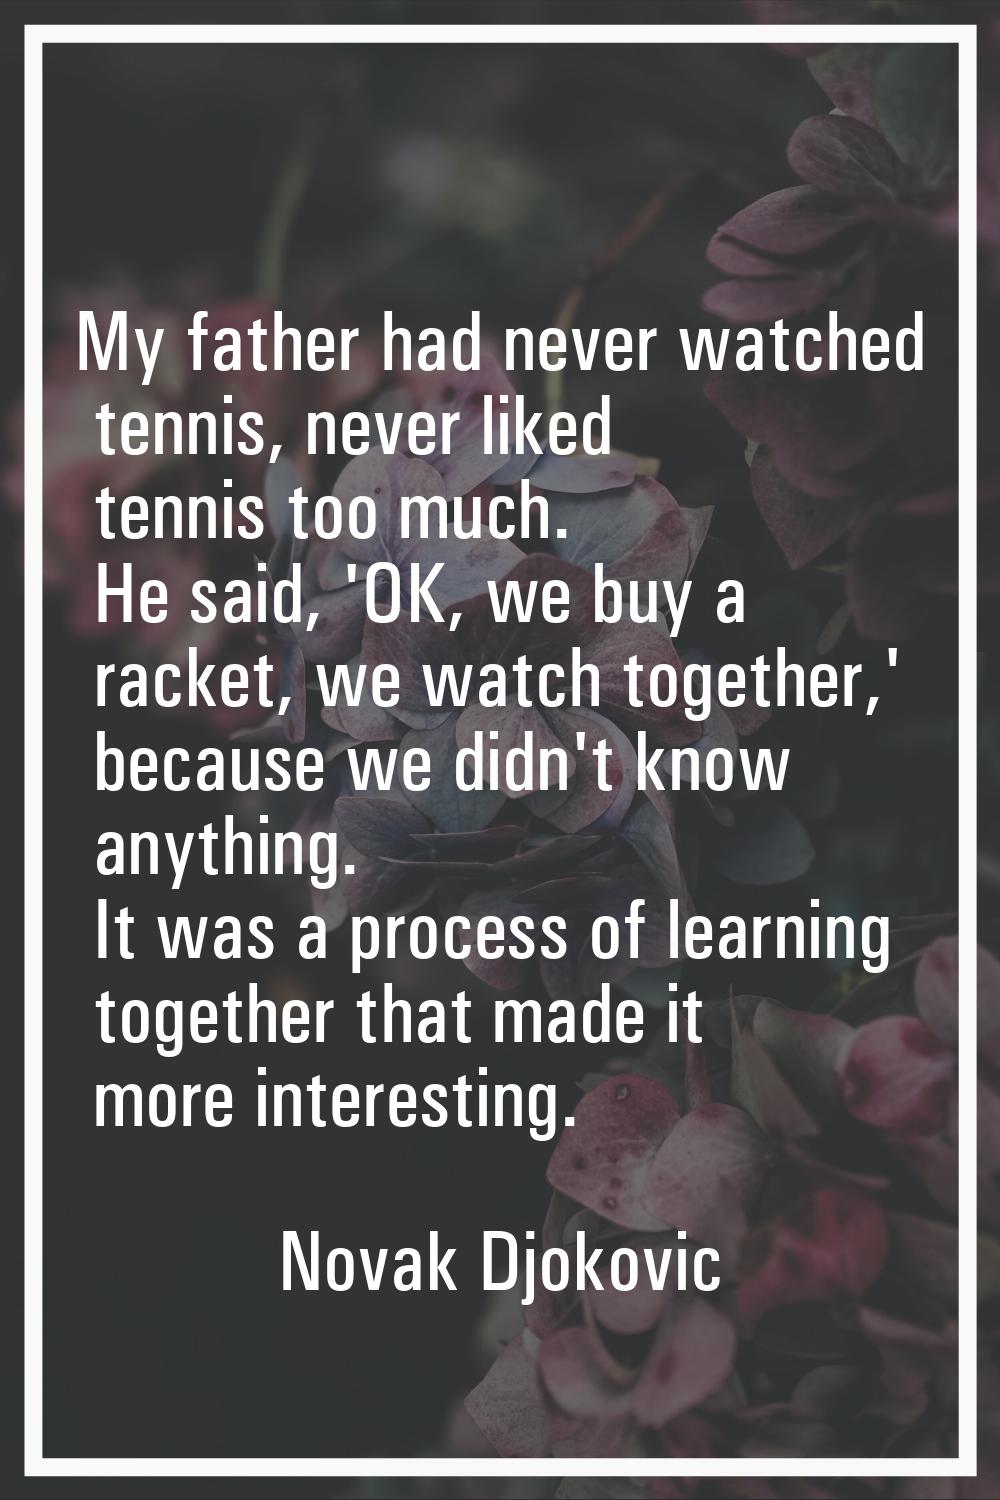 My father had never watched tennis, never liked tennis too much. He said, 'OK, we buy a racket, we 